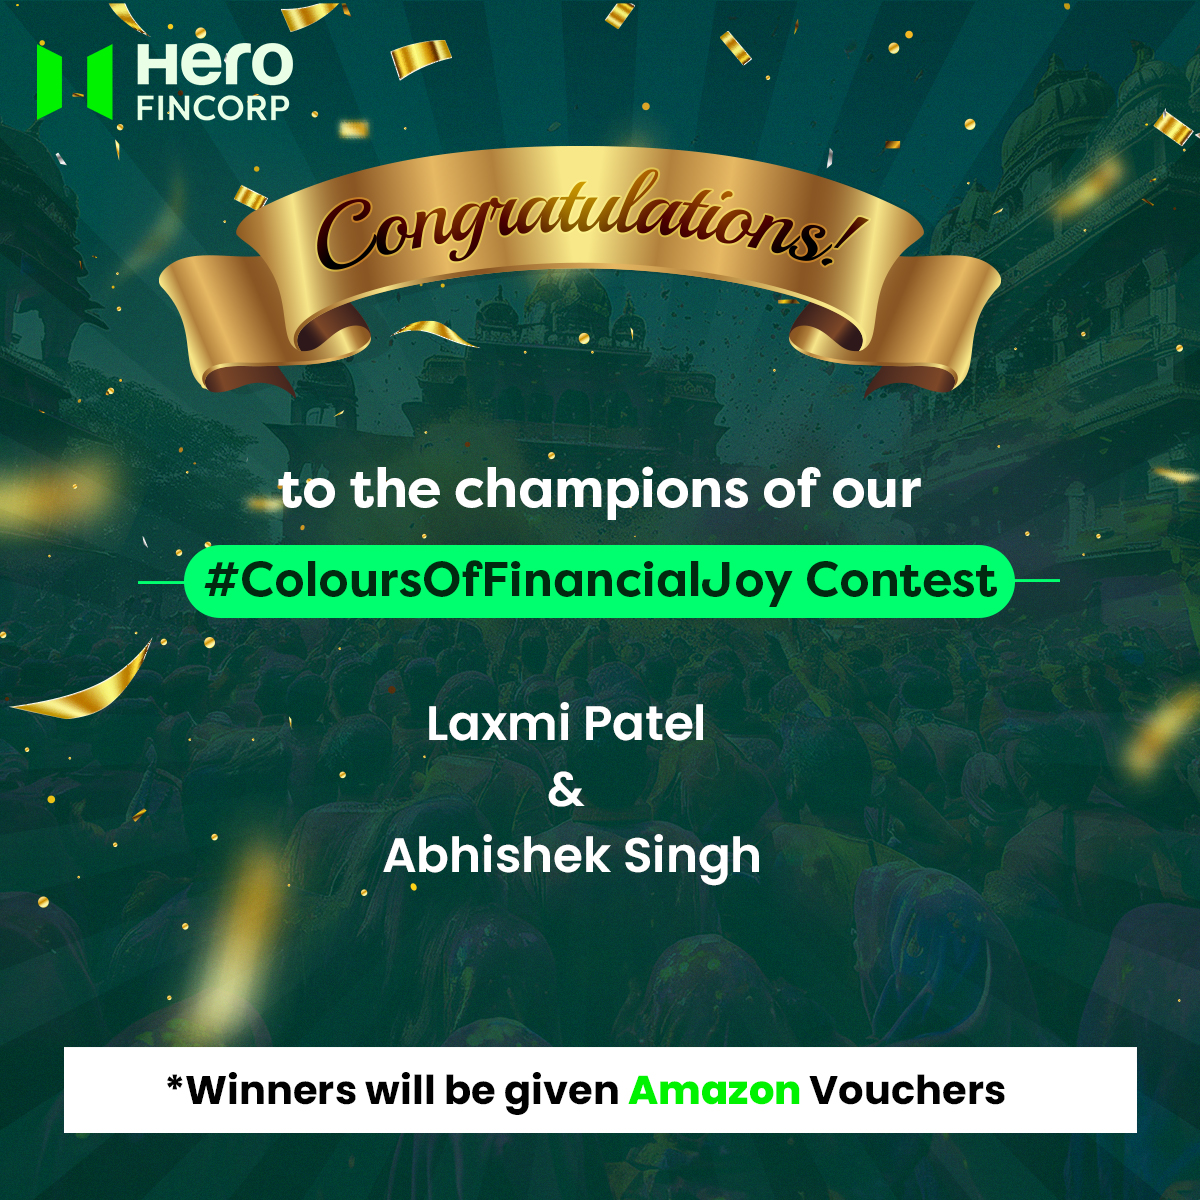 Congratulations to our #ColoursOfFinancialJoyContest winners! Your insights have painted a brighter picture for us all. Enjoy your Amazon Vouchers! 🎨💰 #HeroFinCorp #WinnersAnnounced #Congratulations #AmazonVoucher